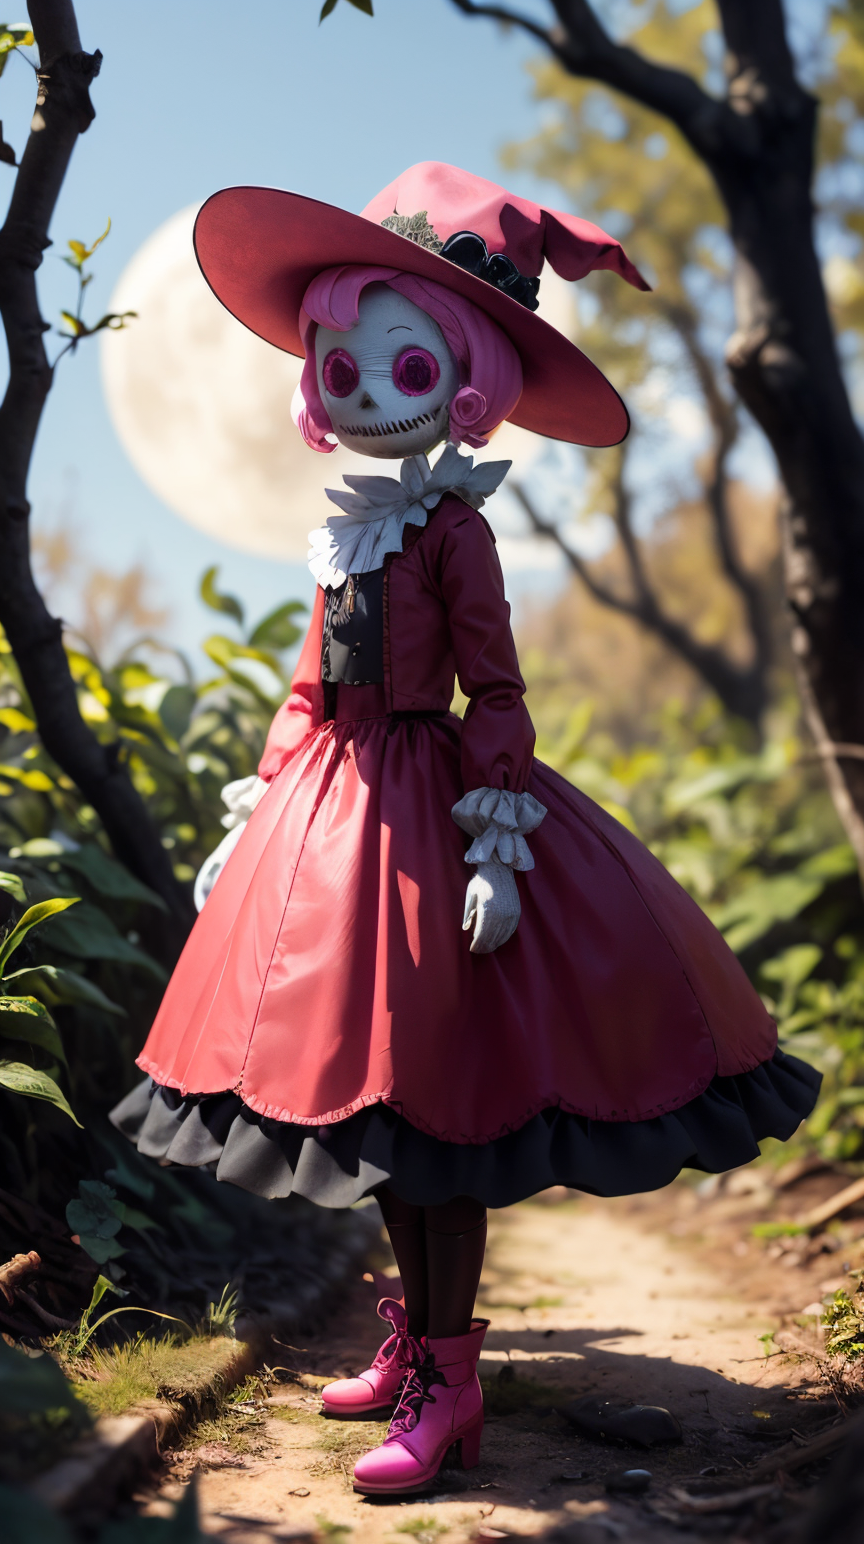 <lora:BarbieCore:0.8> BarbieCore a creepy scarecrow in an old woods, moon casting long shadows, (shiny plastic:0.8), (pink...